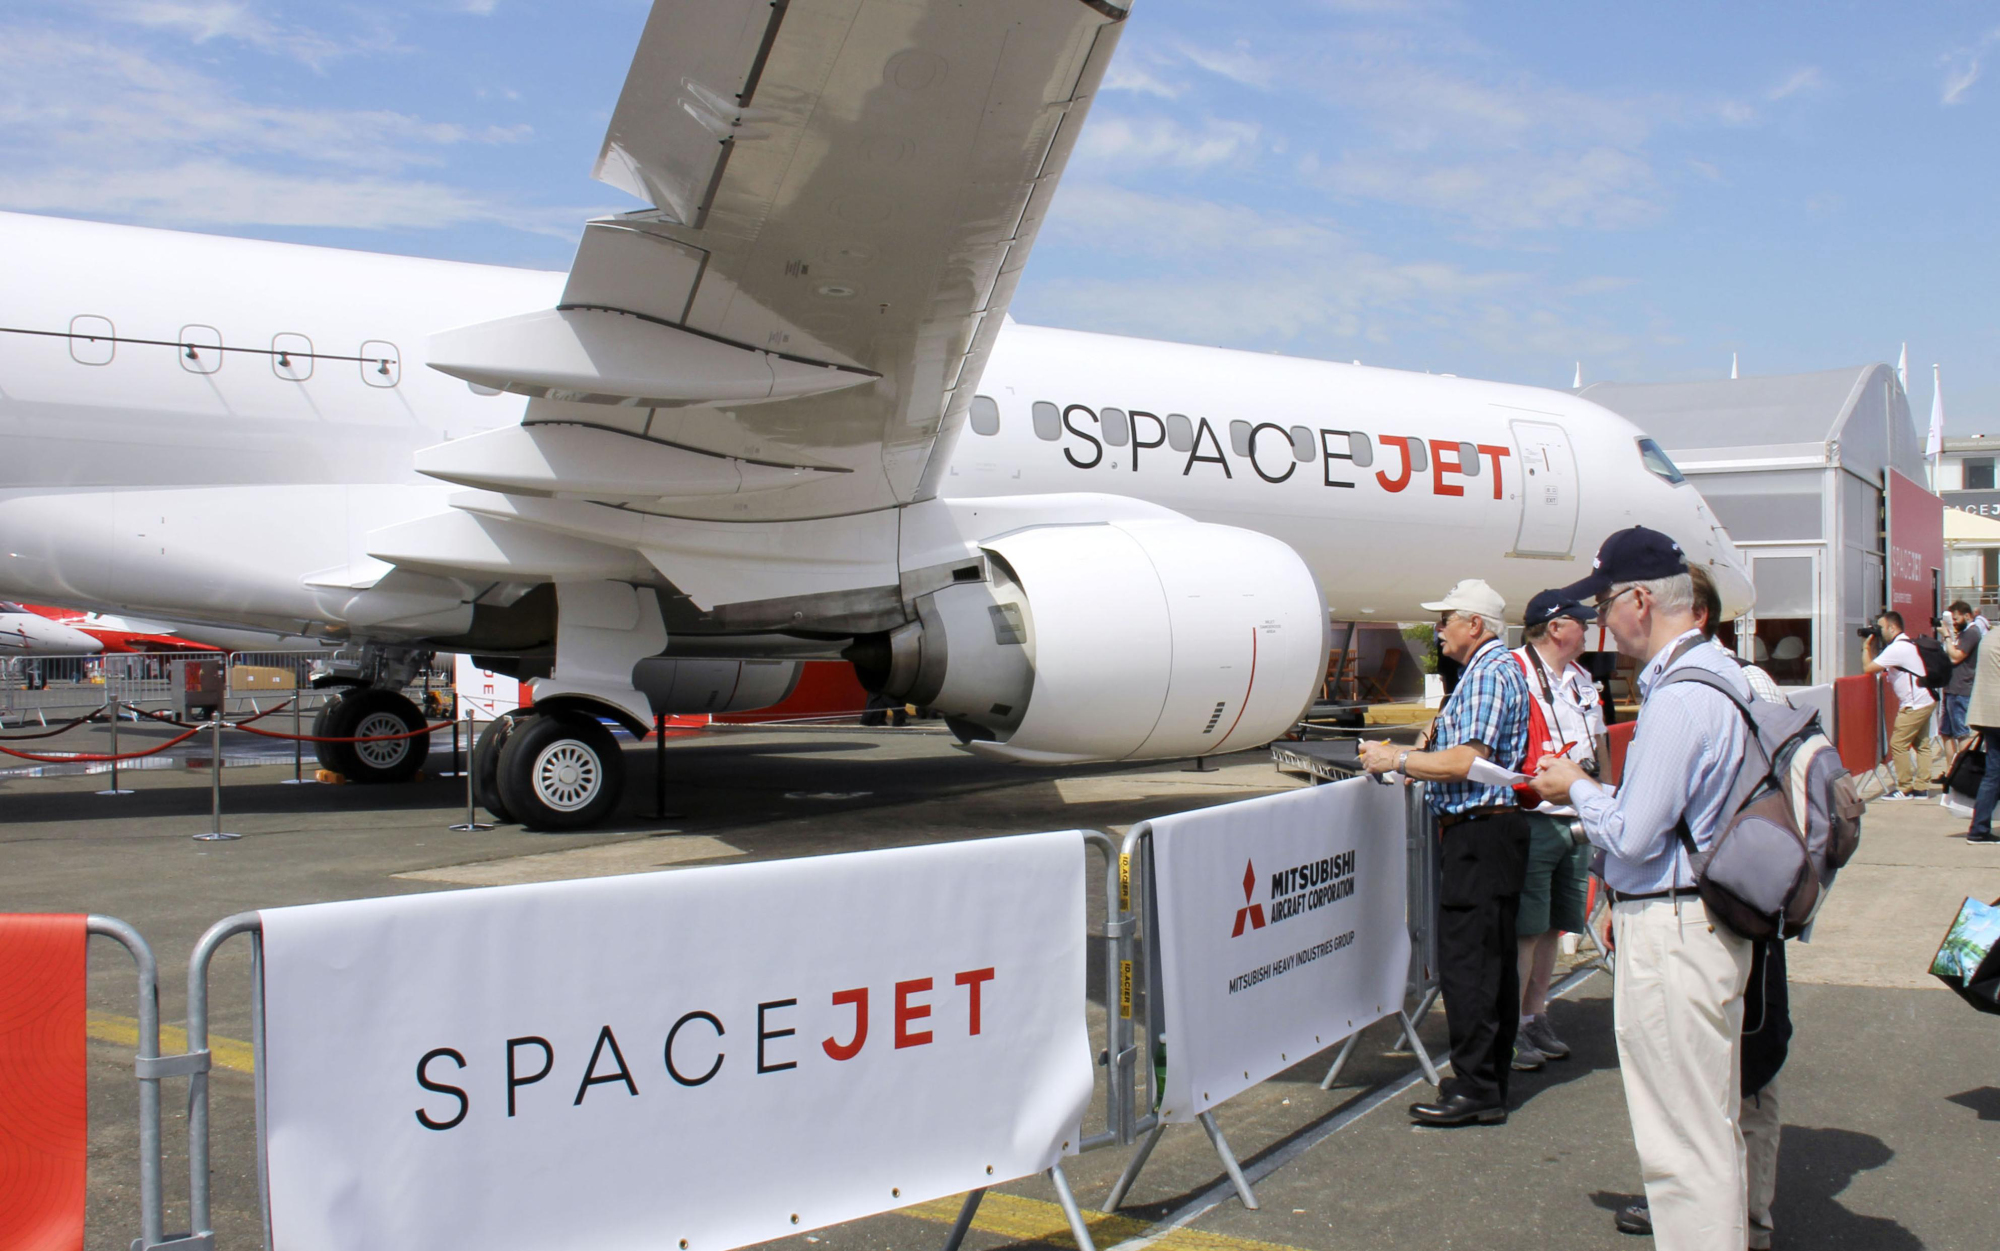 Mitsubishi Aircraft Corp.'s SpaceJet is displayed at the International Paris Air Show in Le Bourget, near Paris, on June 18. | KYODO